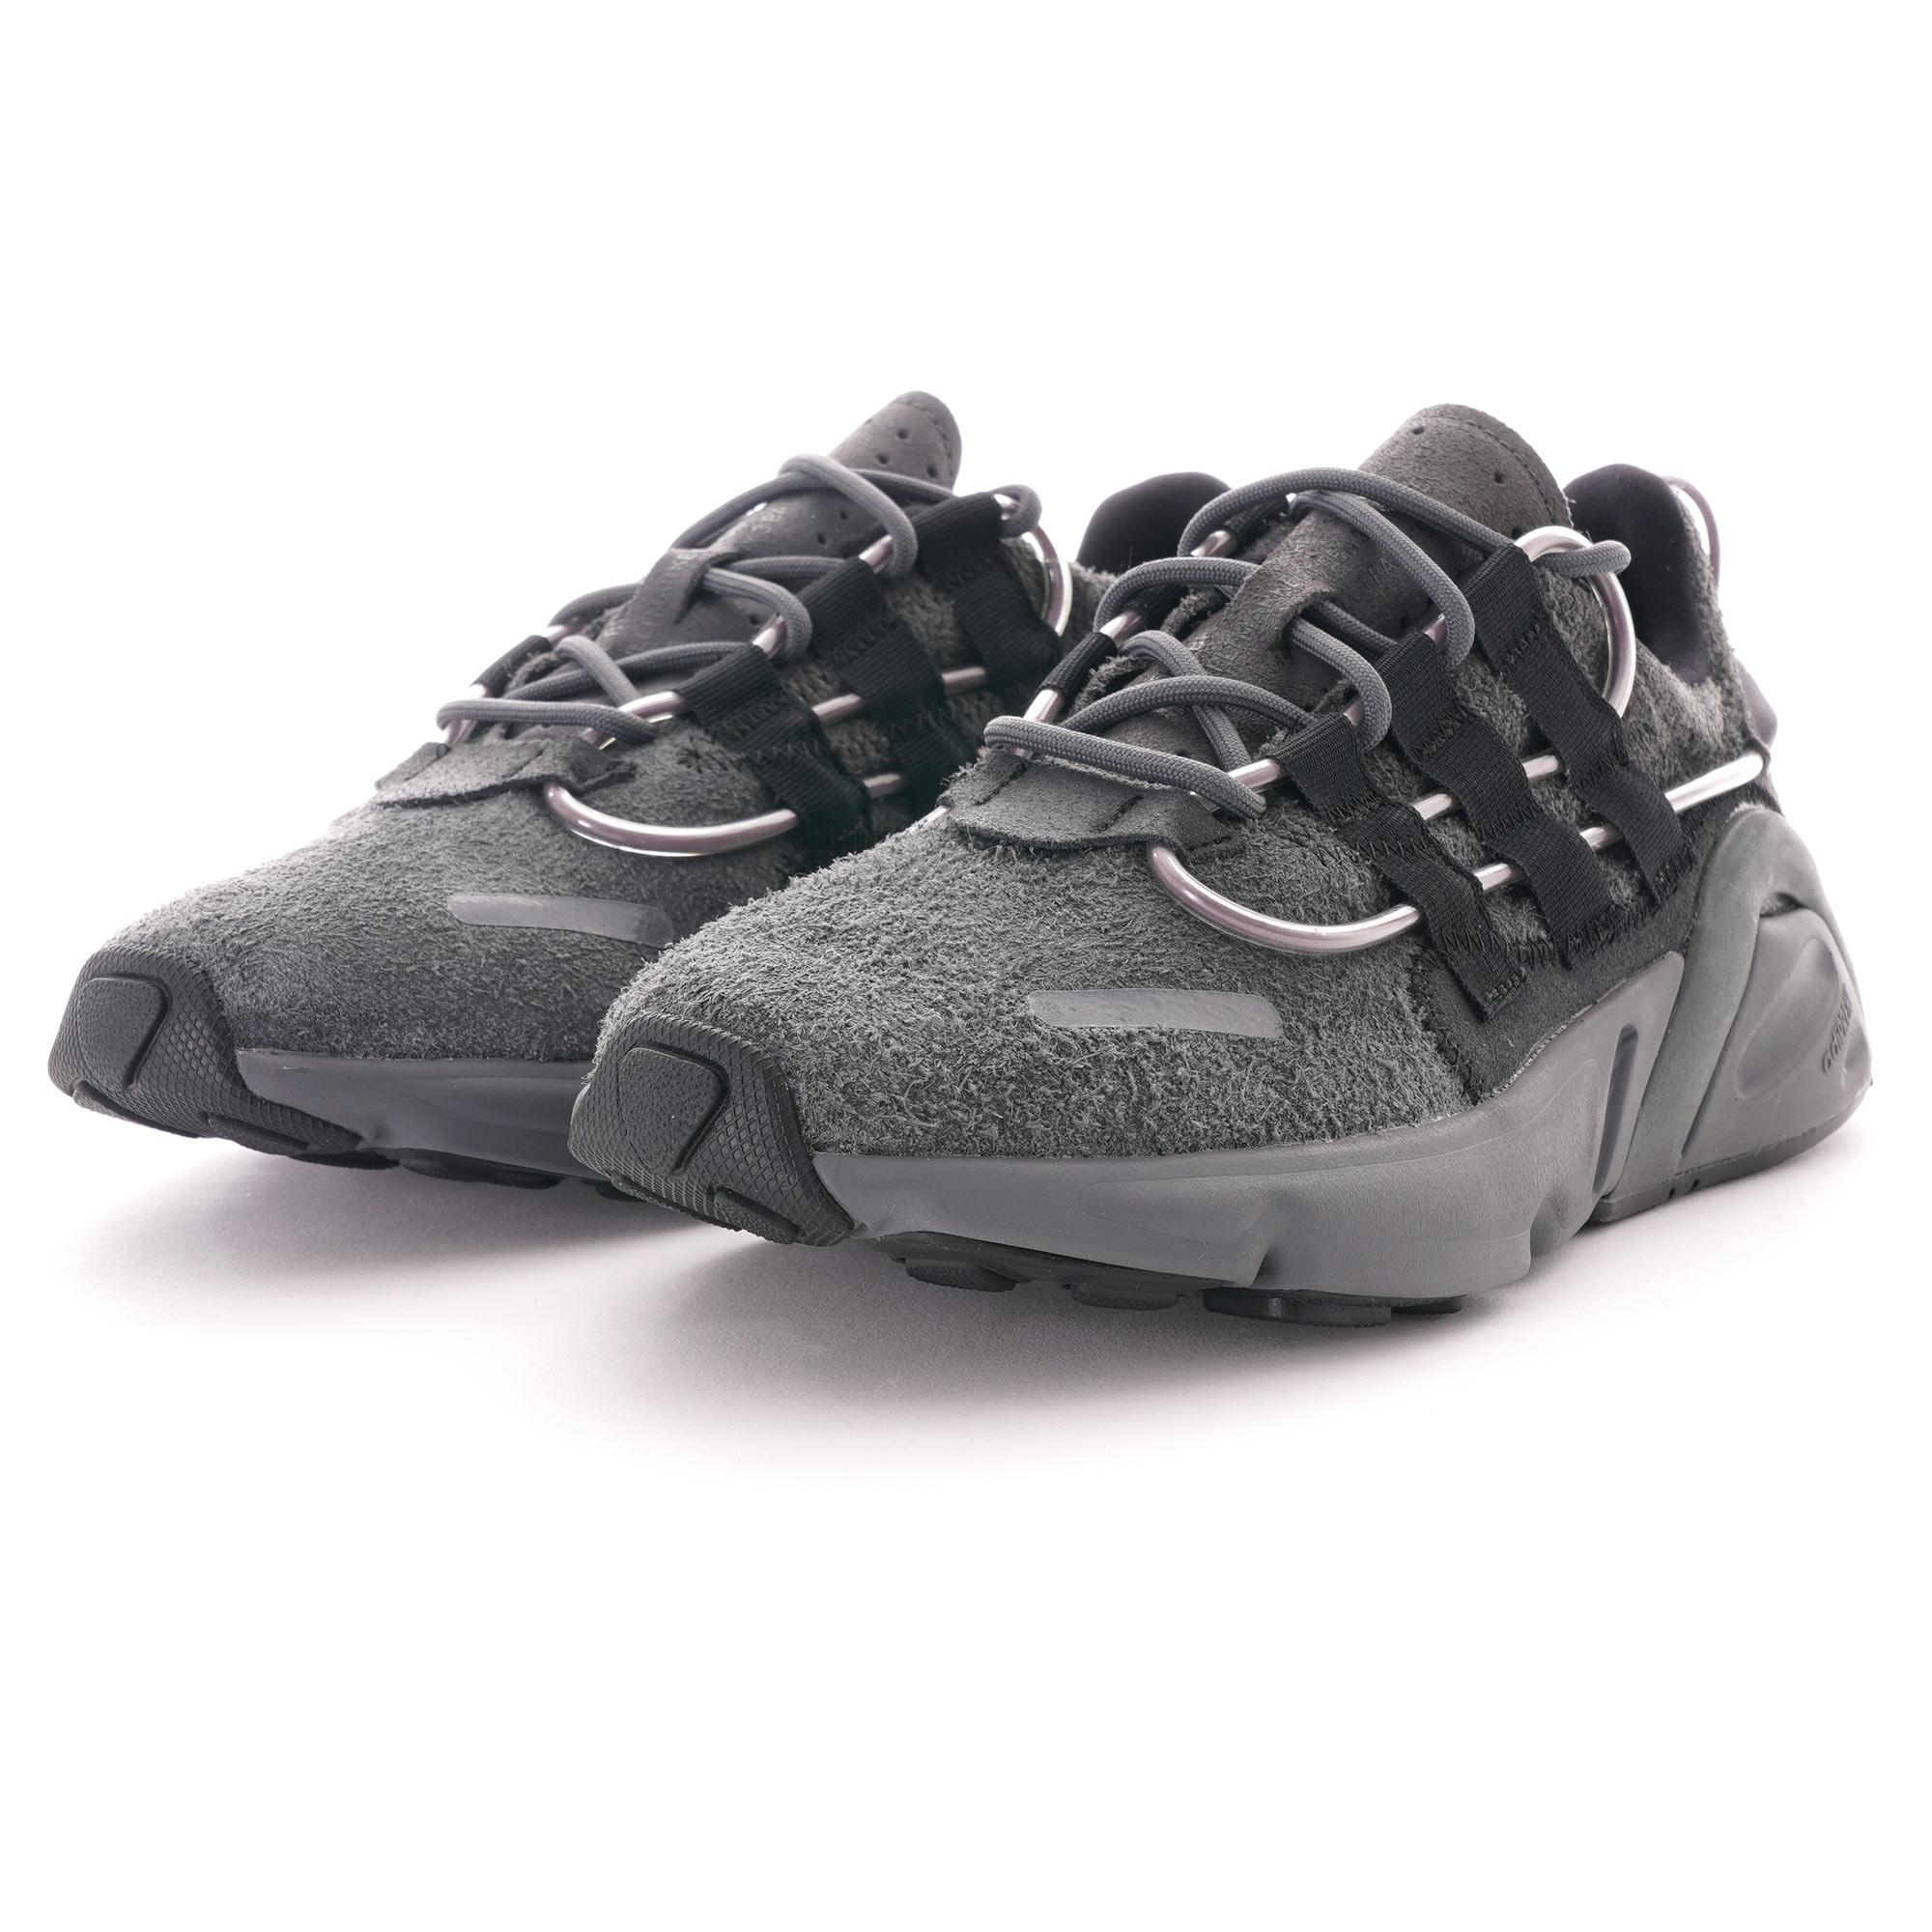 adidas Suede Lxcon | Grey Six | Ef4028 Colour: Grey Six, Size: Uk in Gray  for Men - Save 13% - Lyst